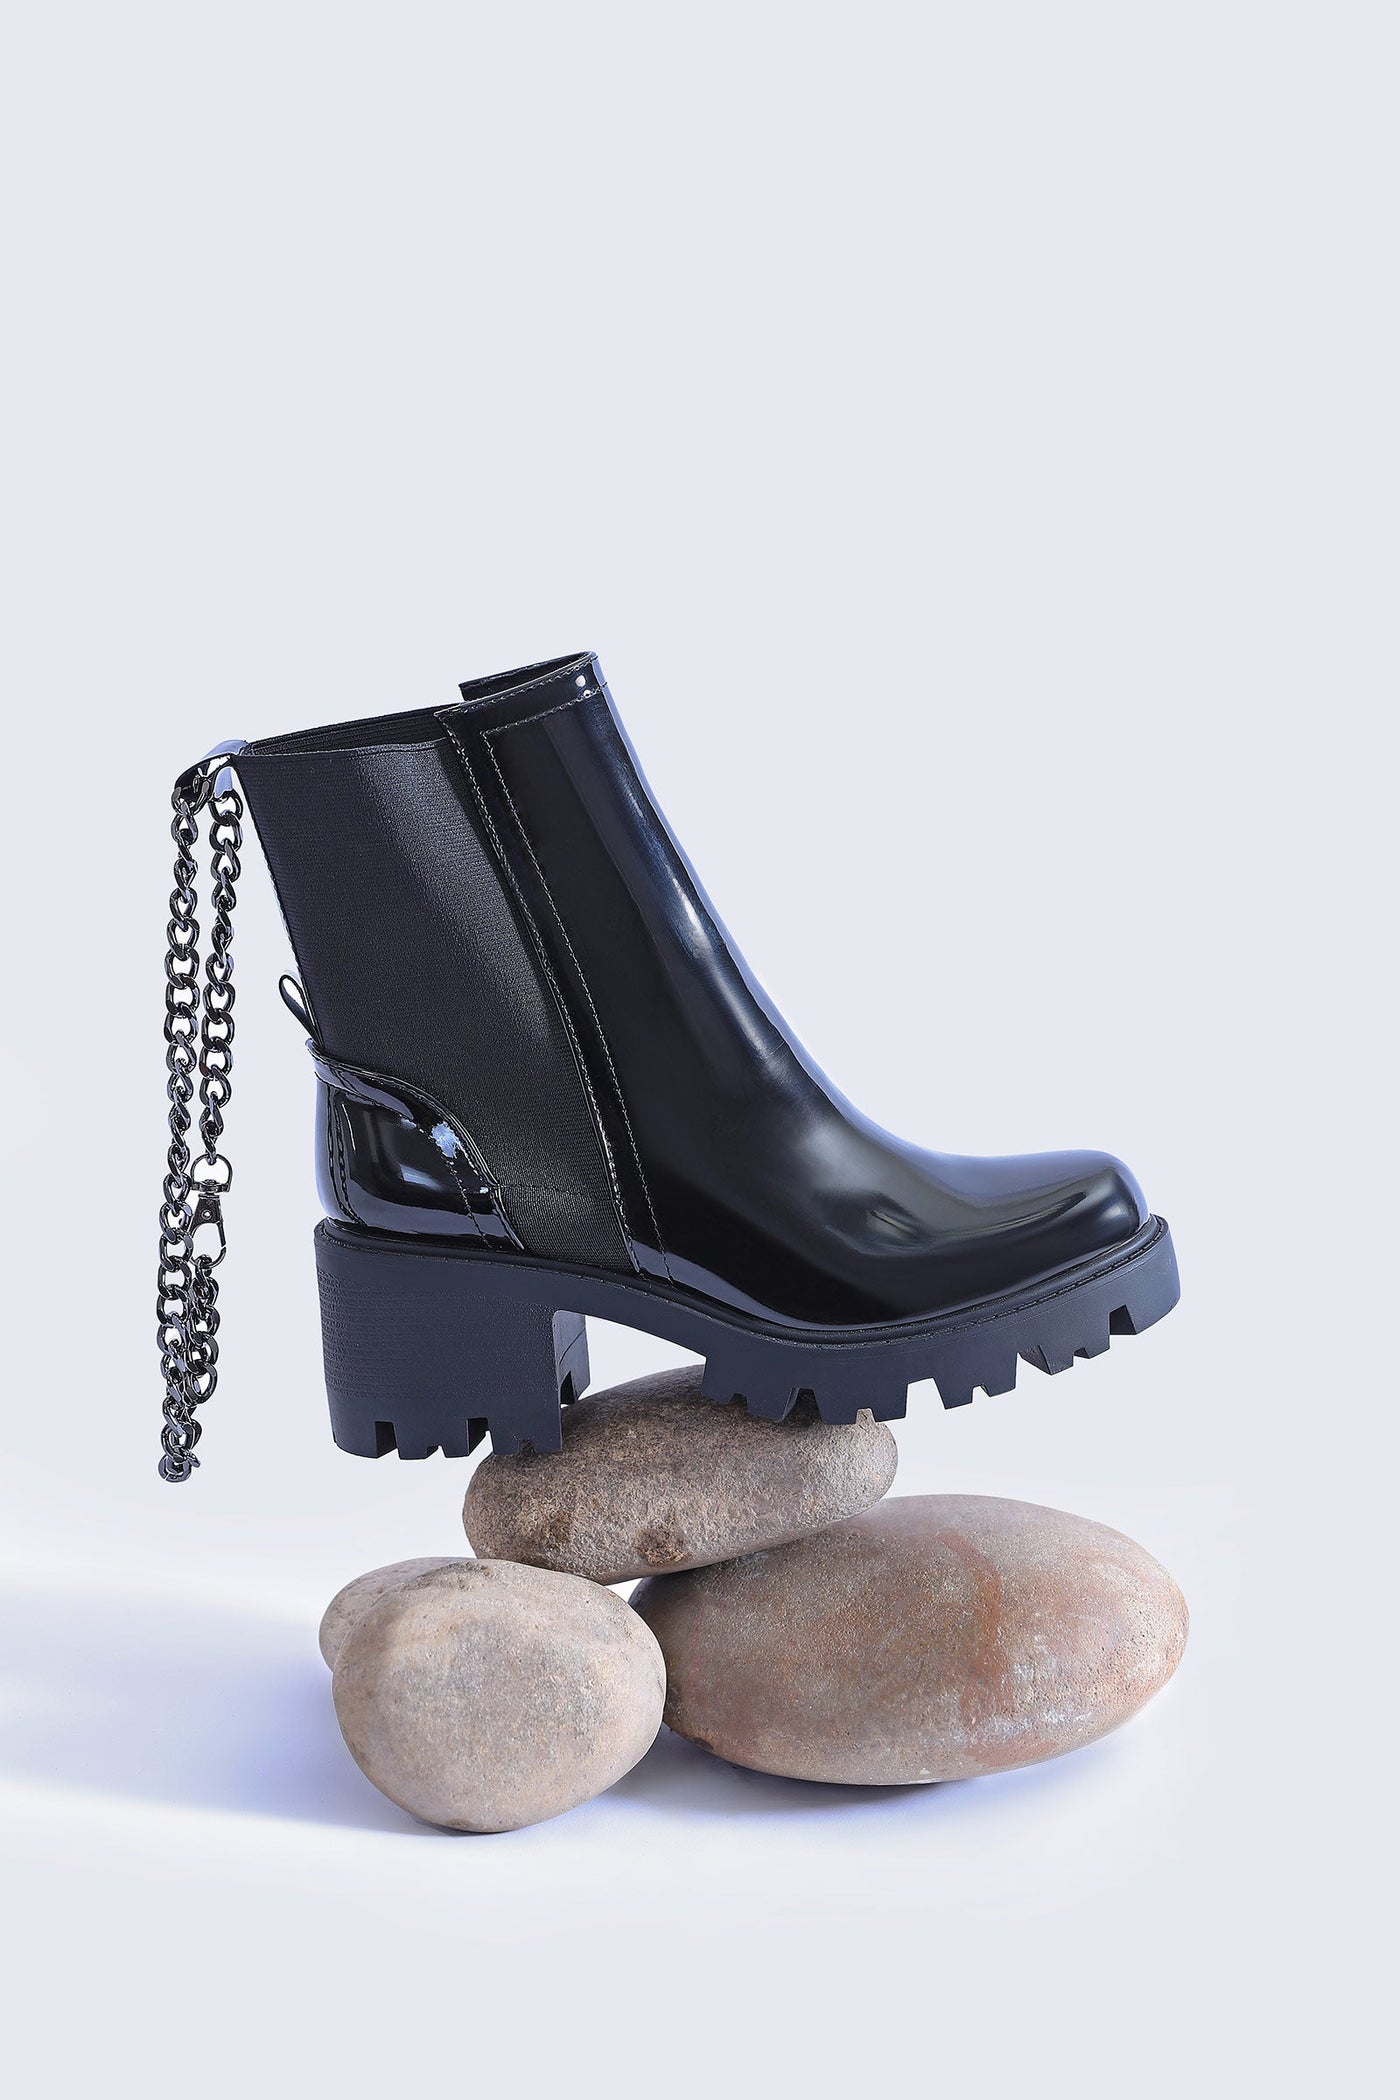 Long Patent Chain Boots